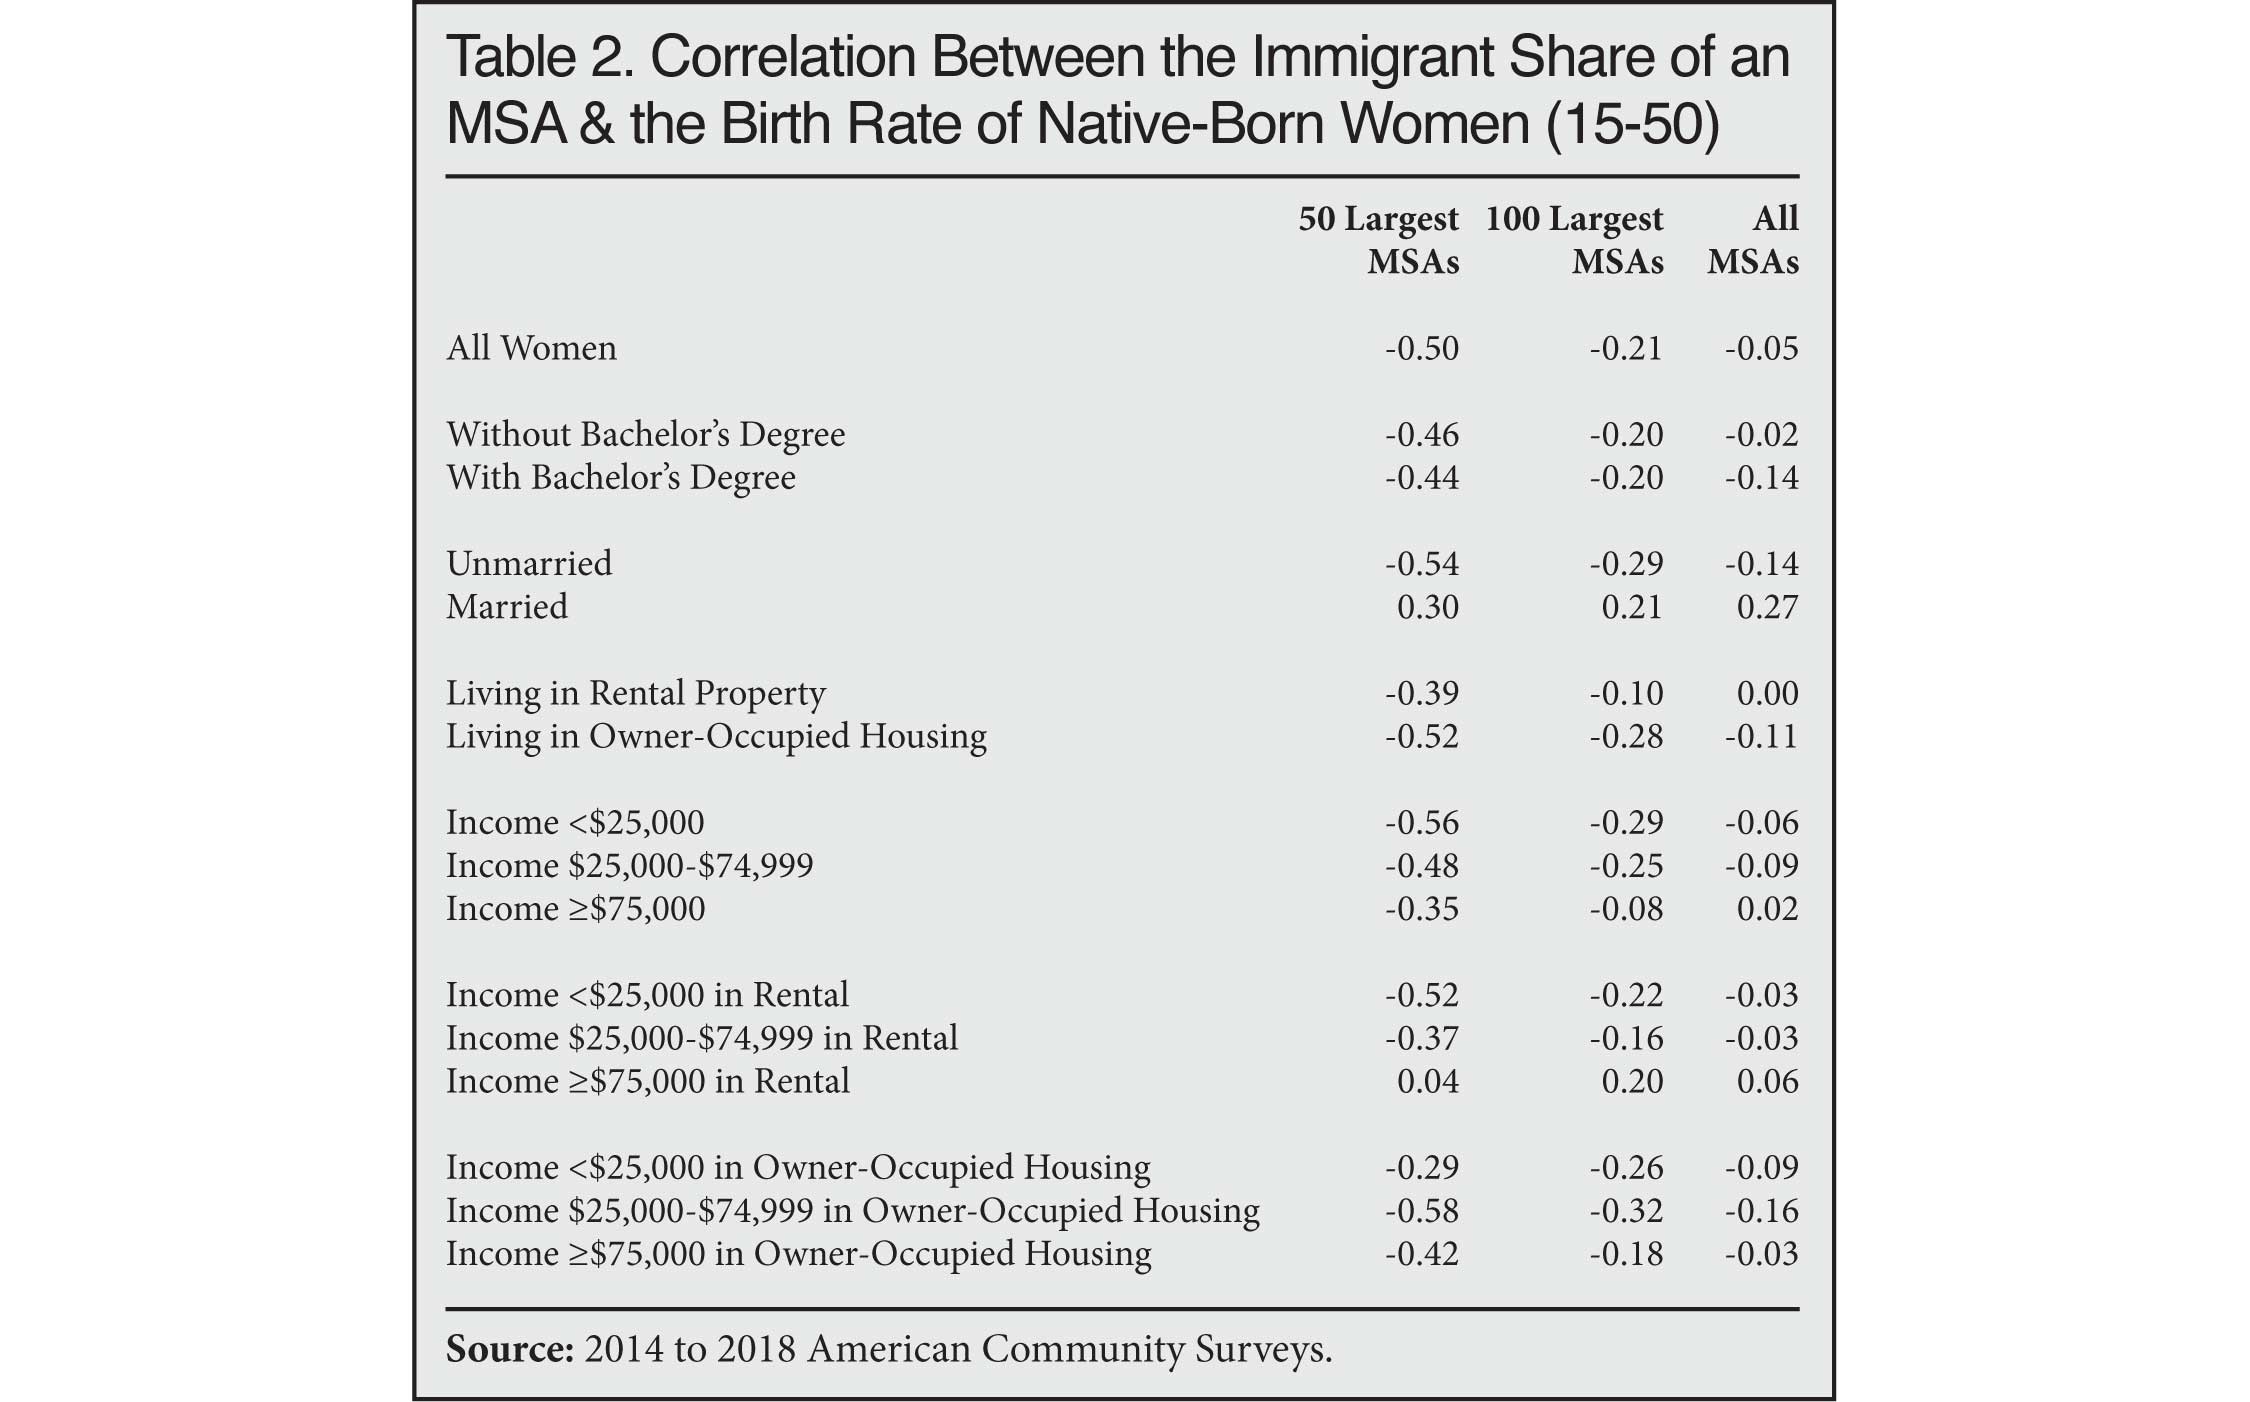 Table: Correlation Between the Immigrant Share of an MSA and the Birth Rate of Native Born Women 15-50